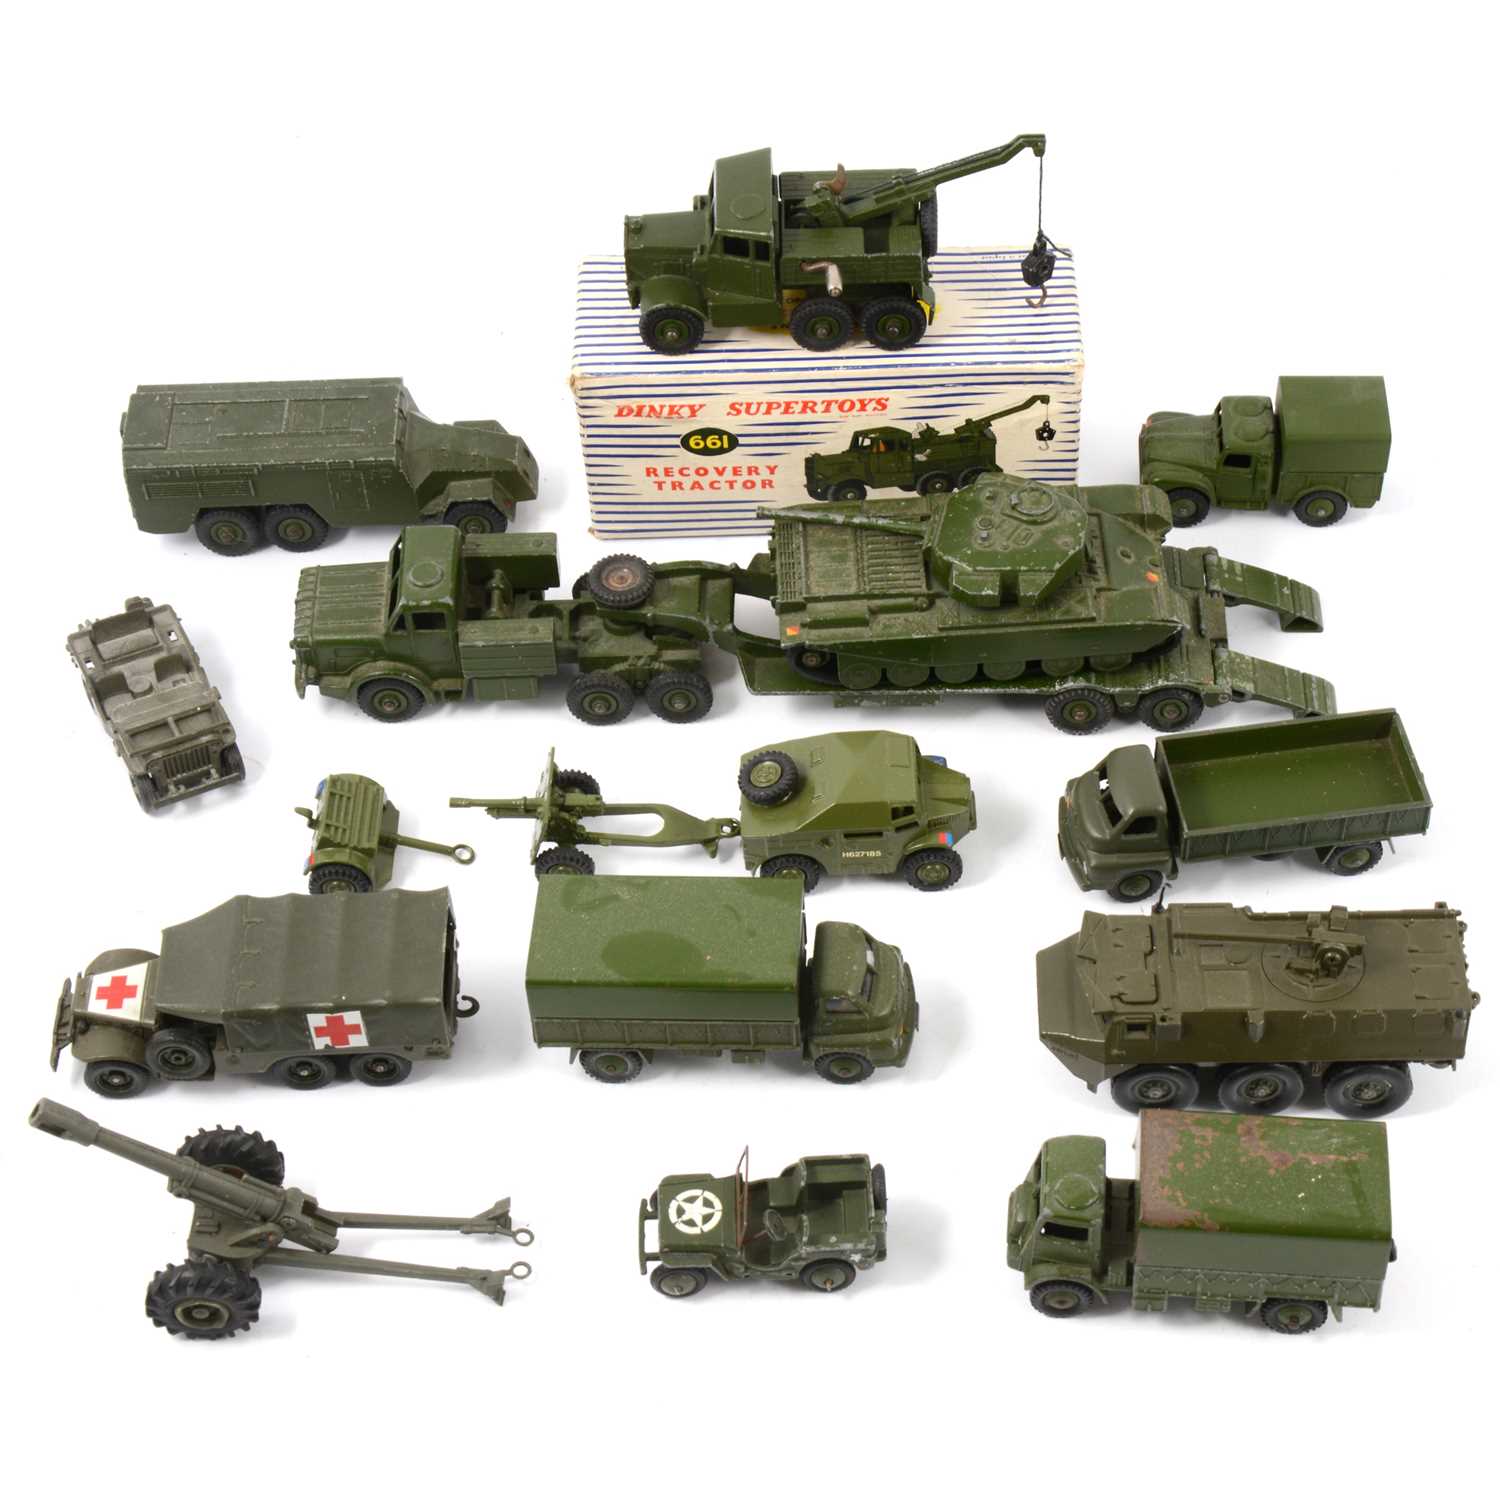 Lot 117 - Dinky and other die-cast military models, including Dinky no.661 Recovery Tractor, boxed